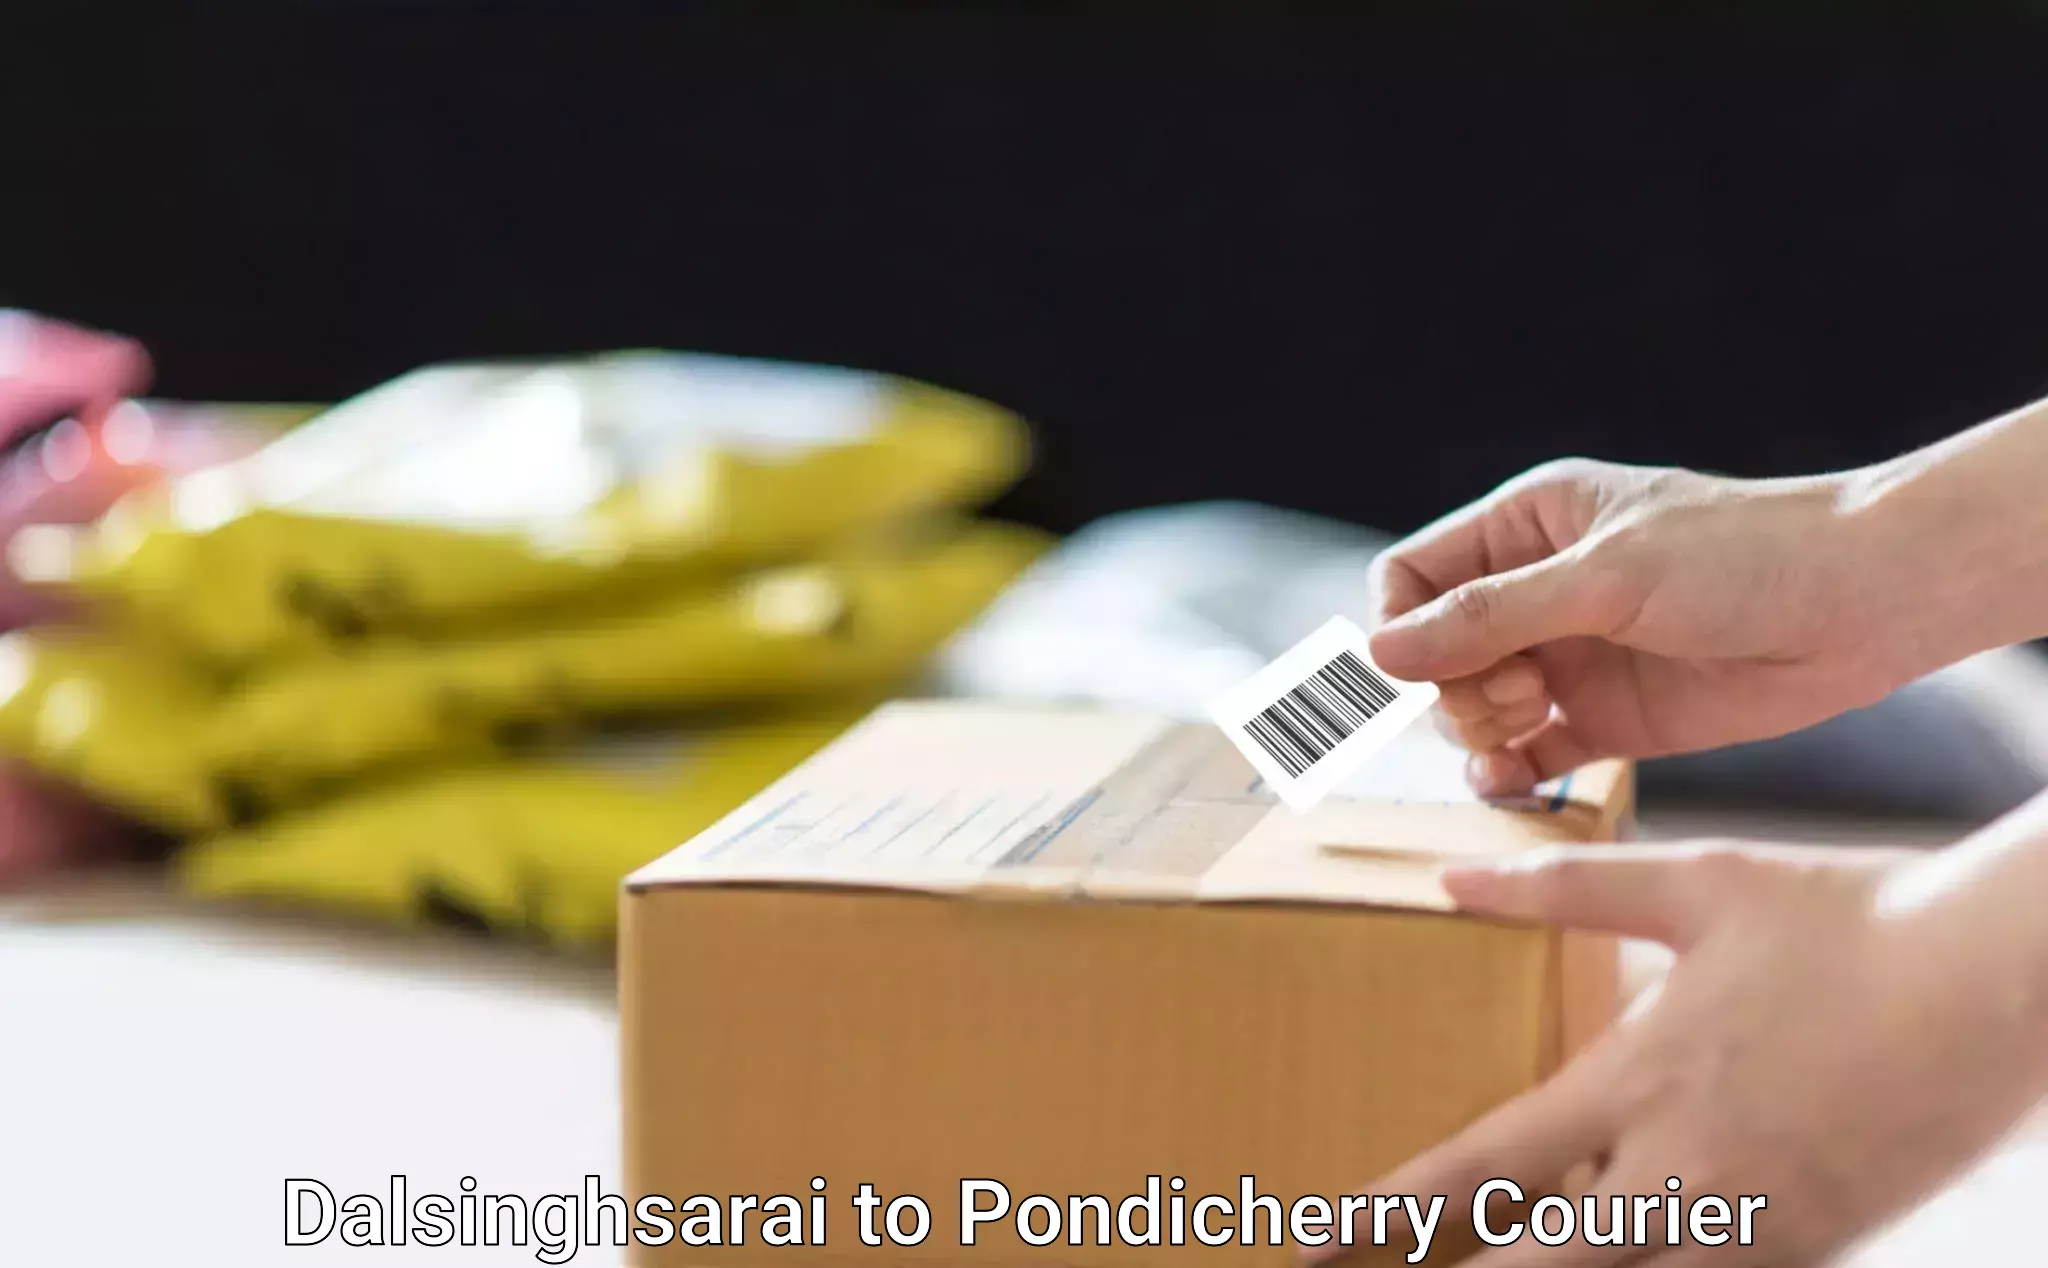 Efficient packing and moving Dalsinghsarai to Pondicherry